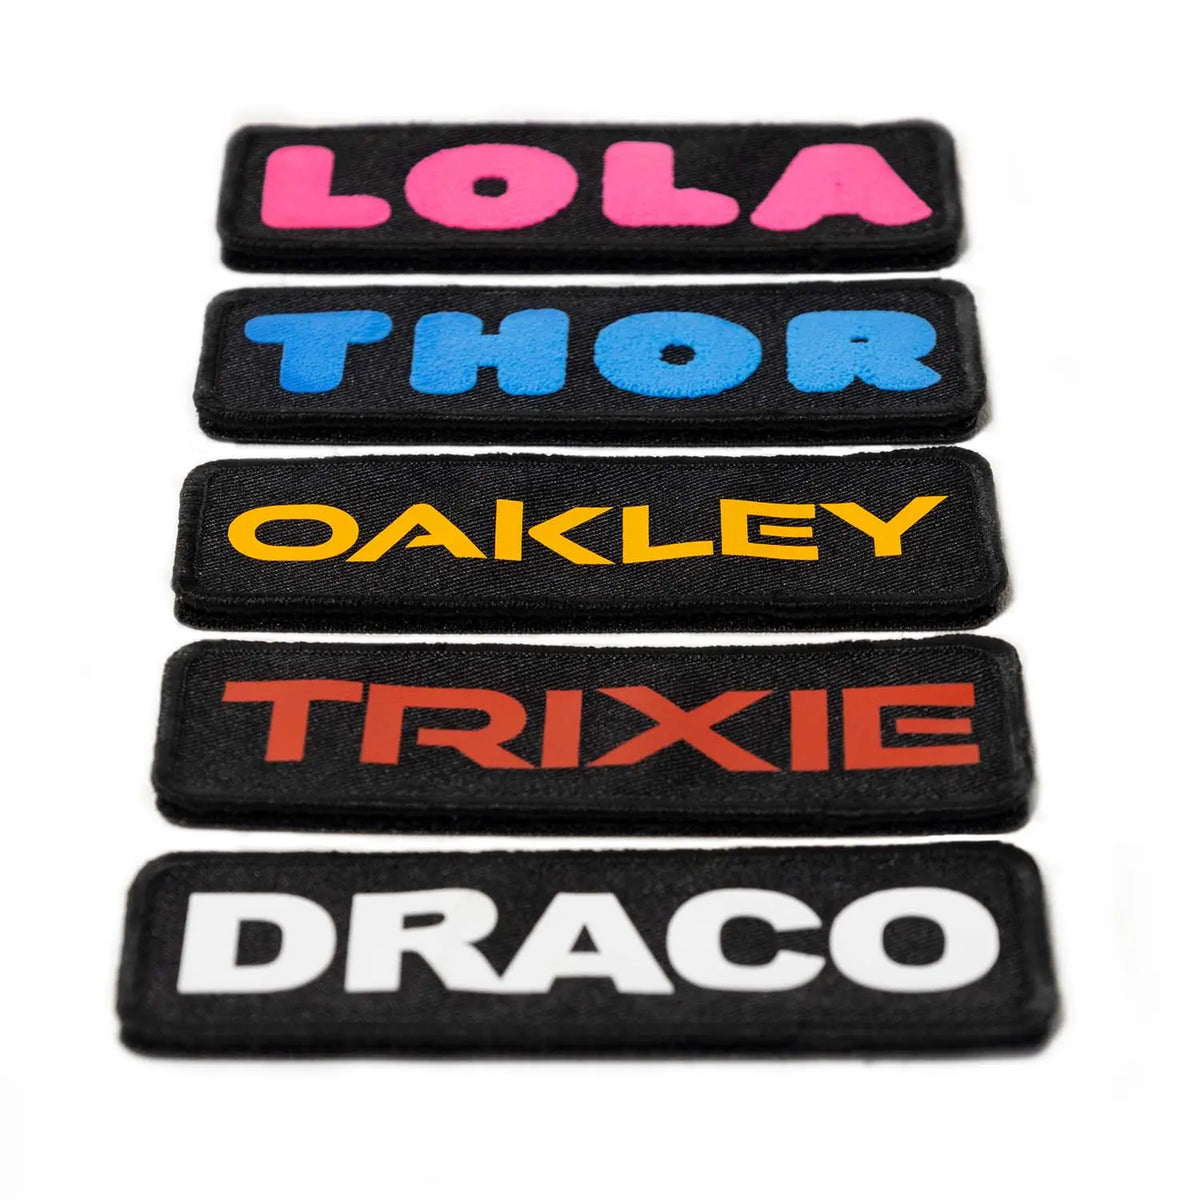 Custom Name Patch for Dogs/K9